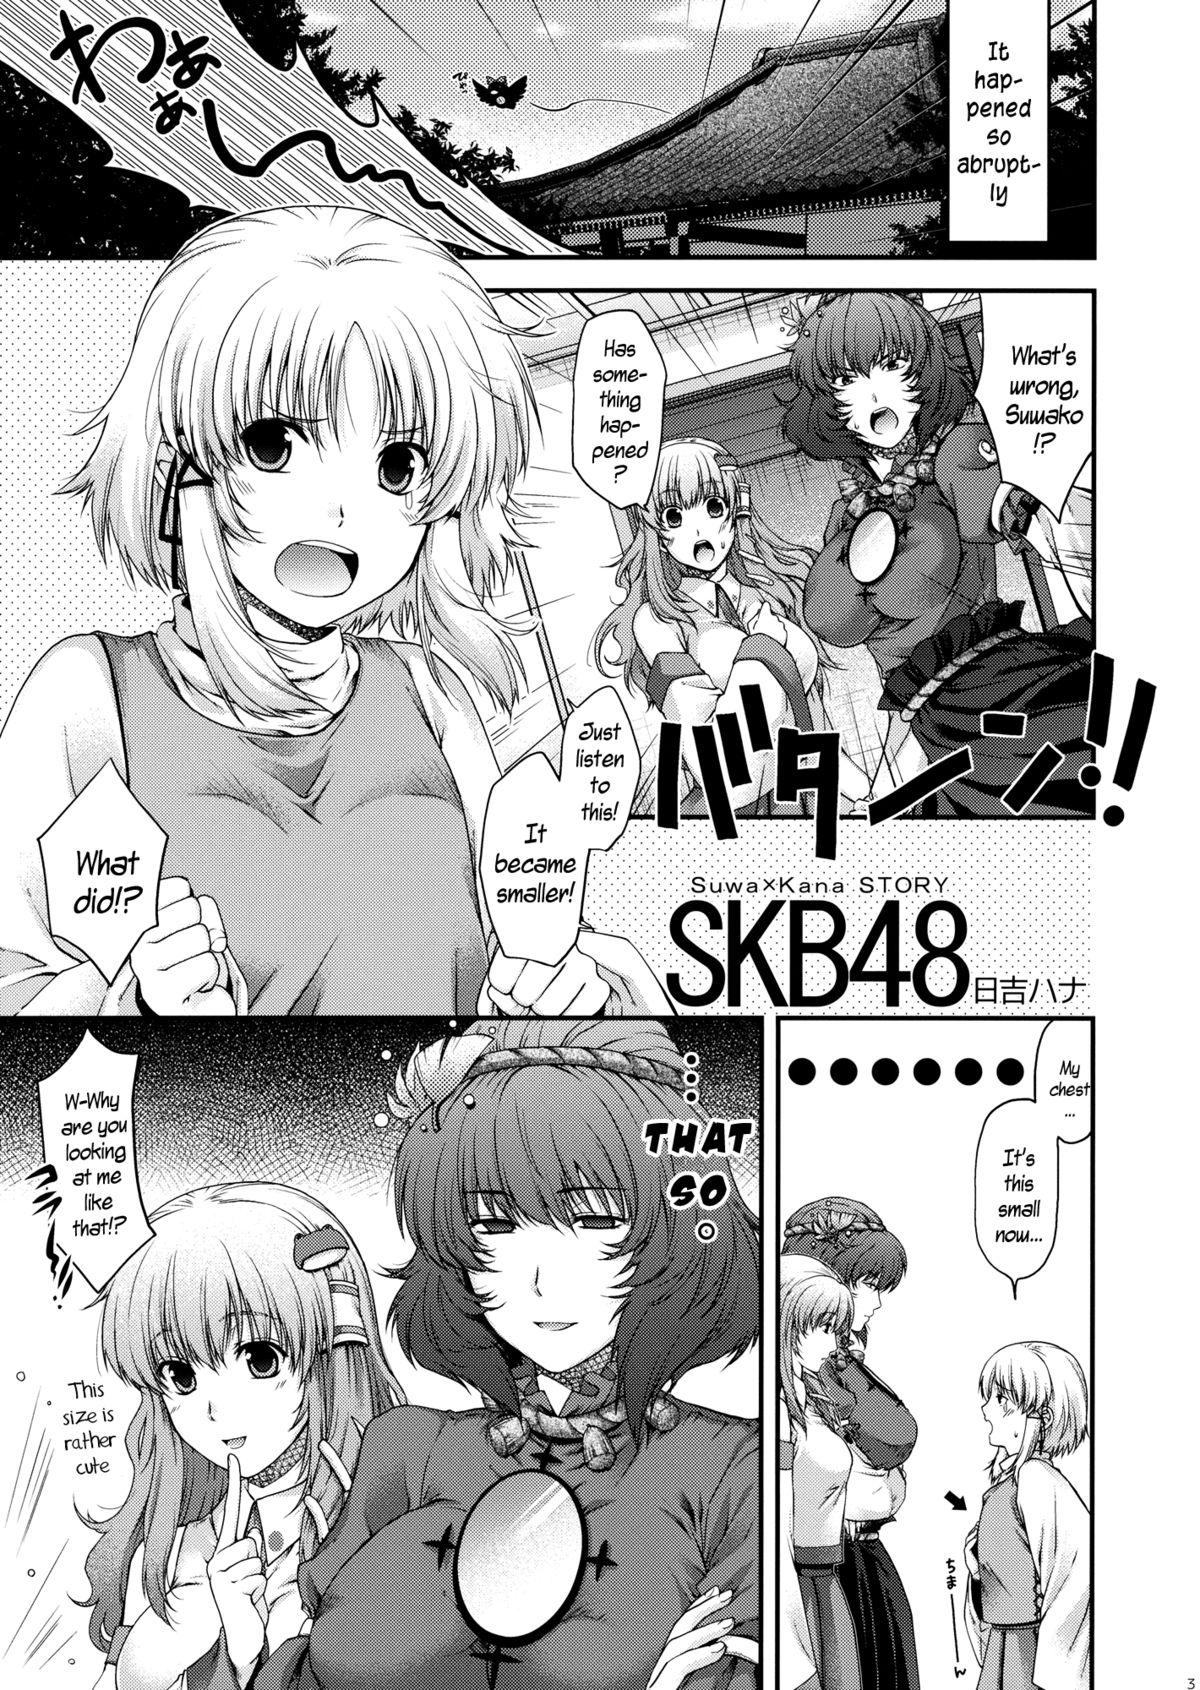 Behind SKB48 - Touhou project Facials - Page 3